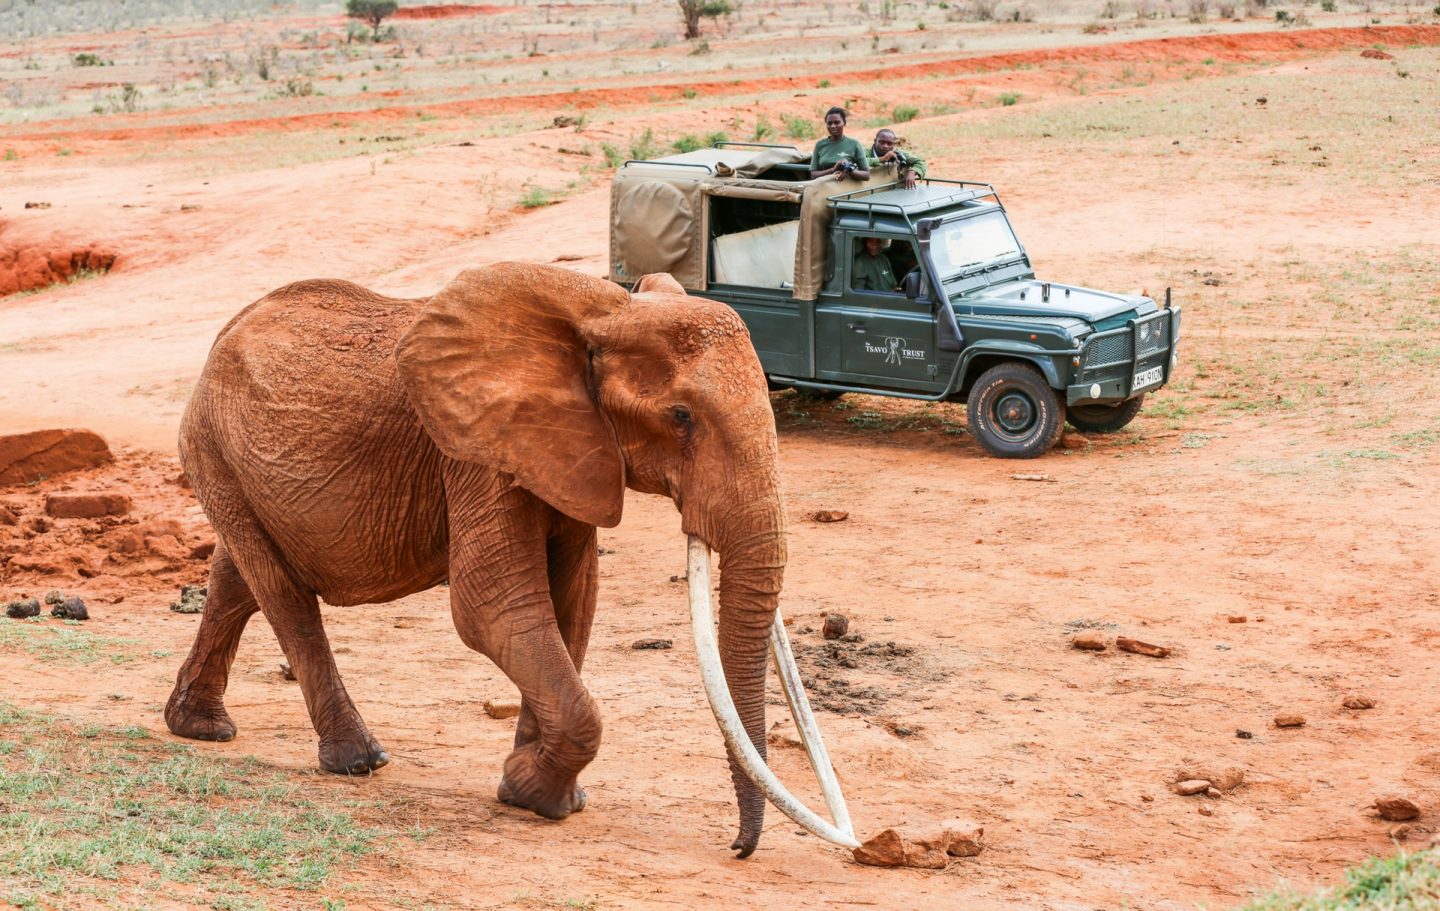 File image of an elephant at the Tsavo National Park.